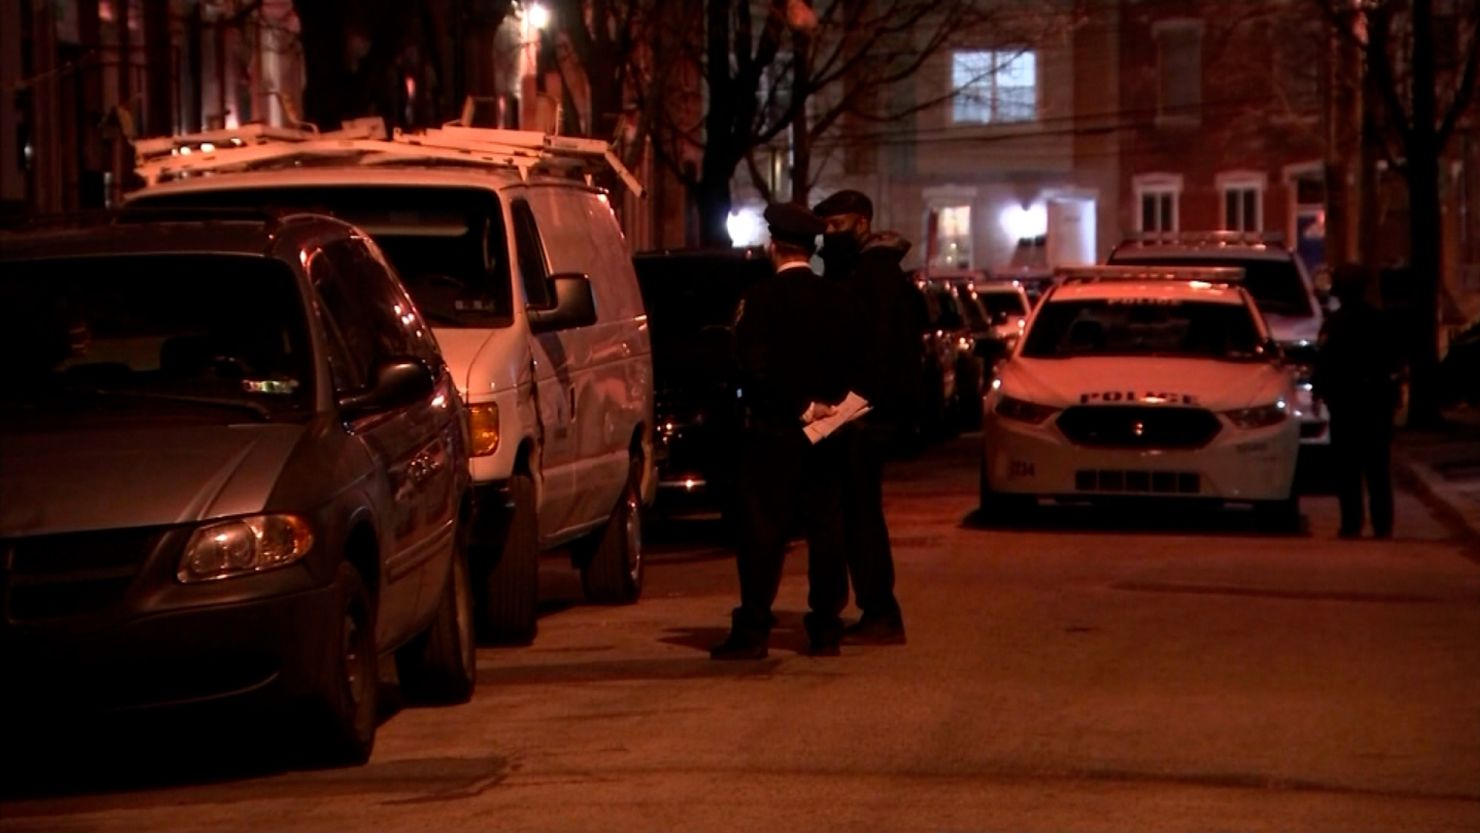 The shooting occurred in the Strawberry Mansion neighborhood of Philadelphia. 